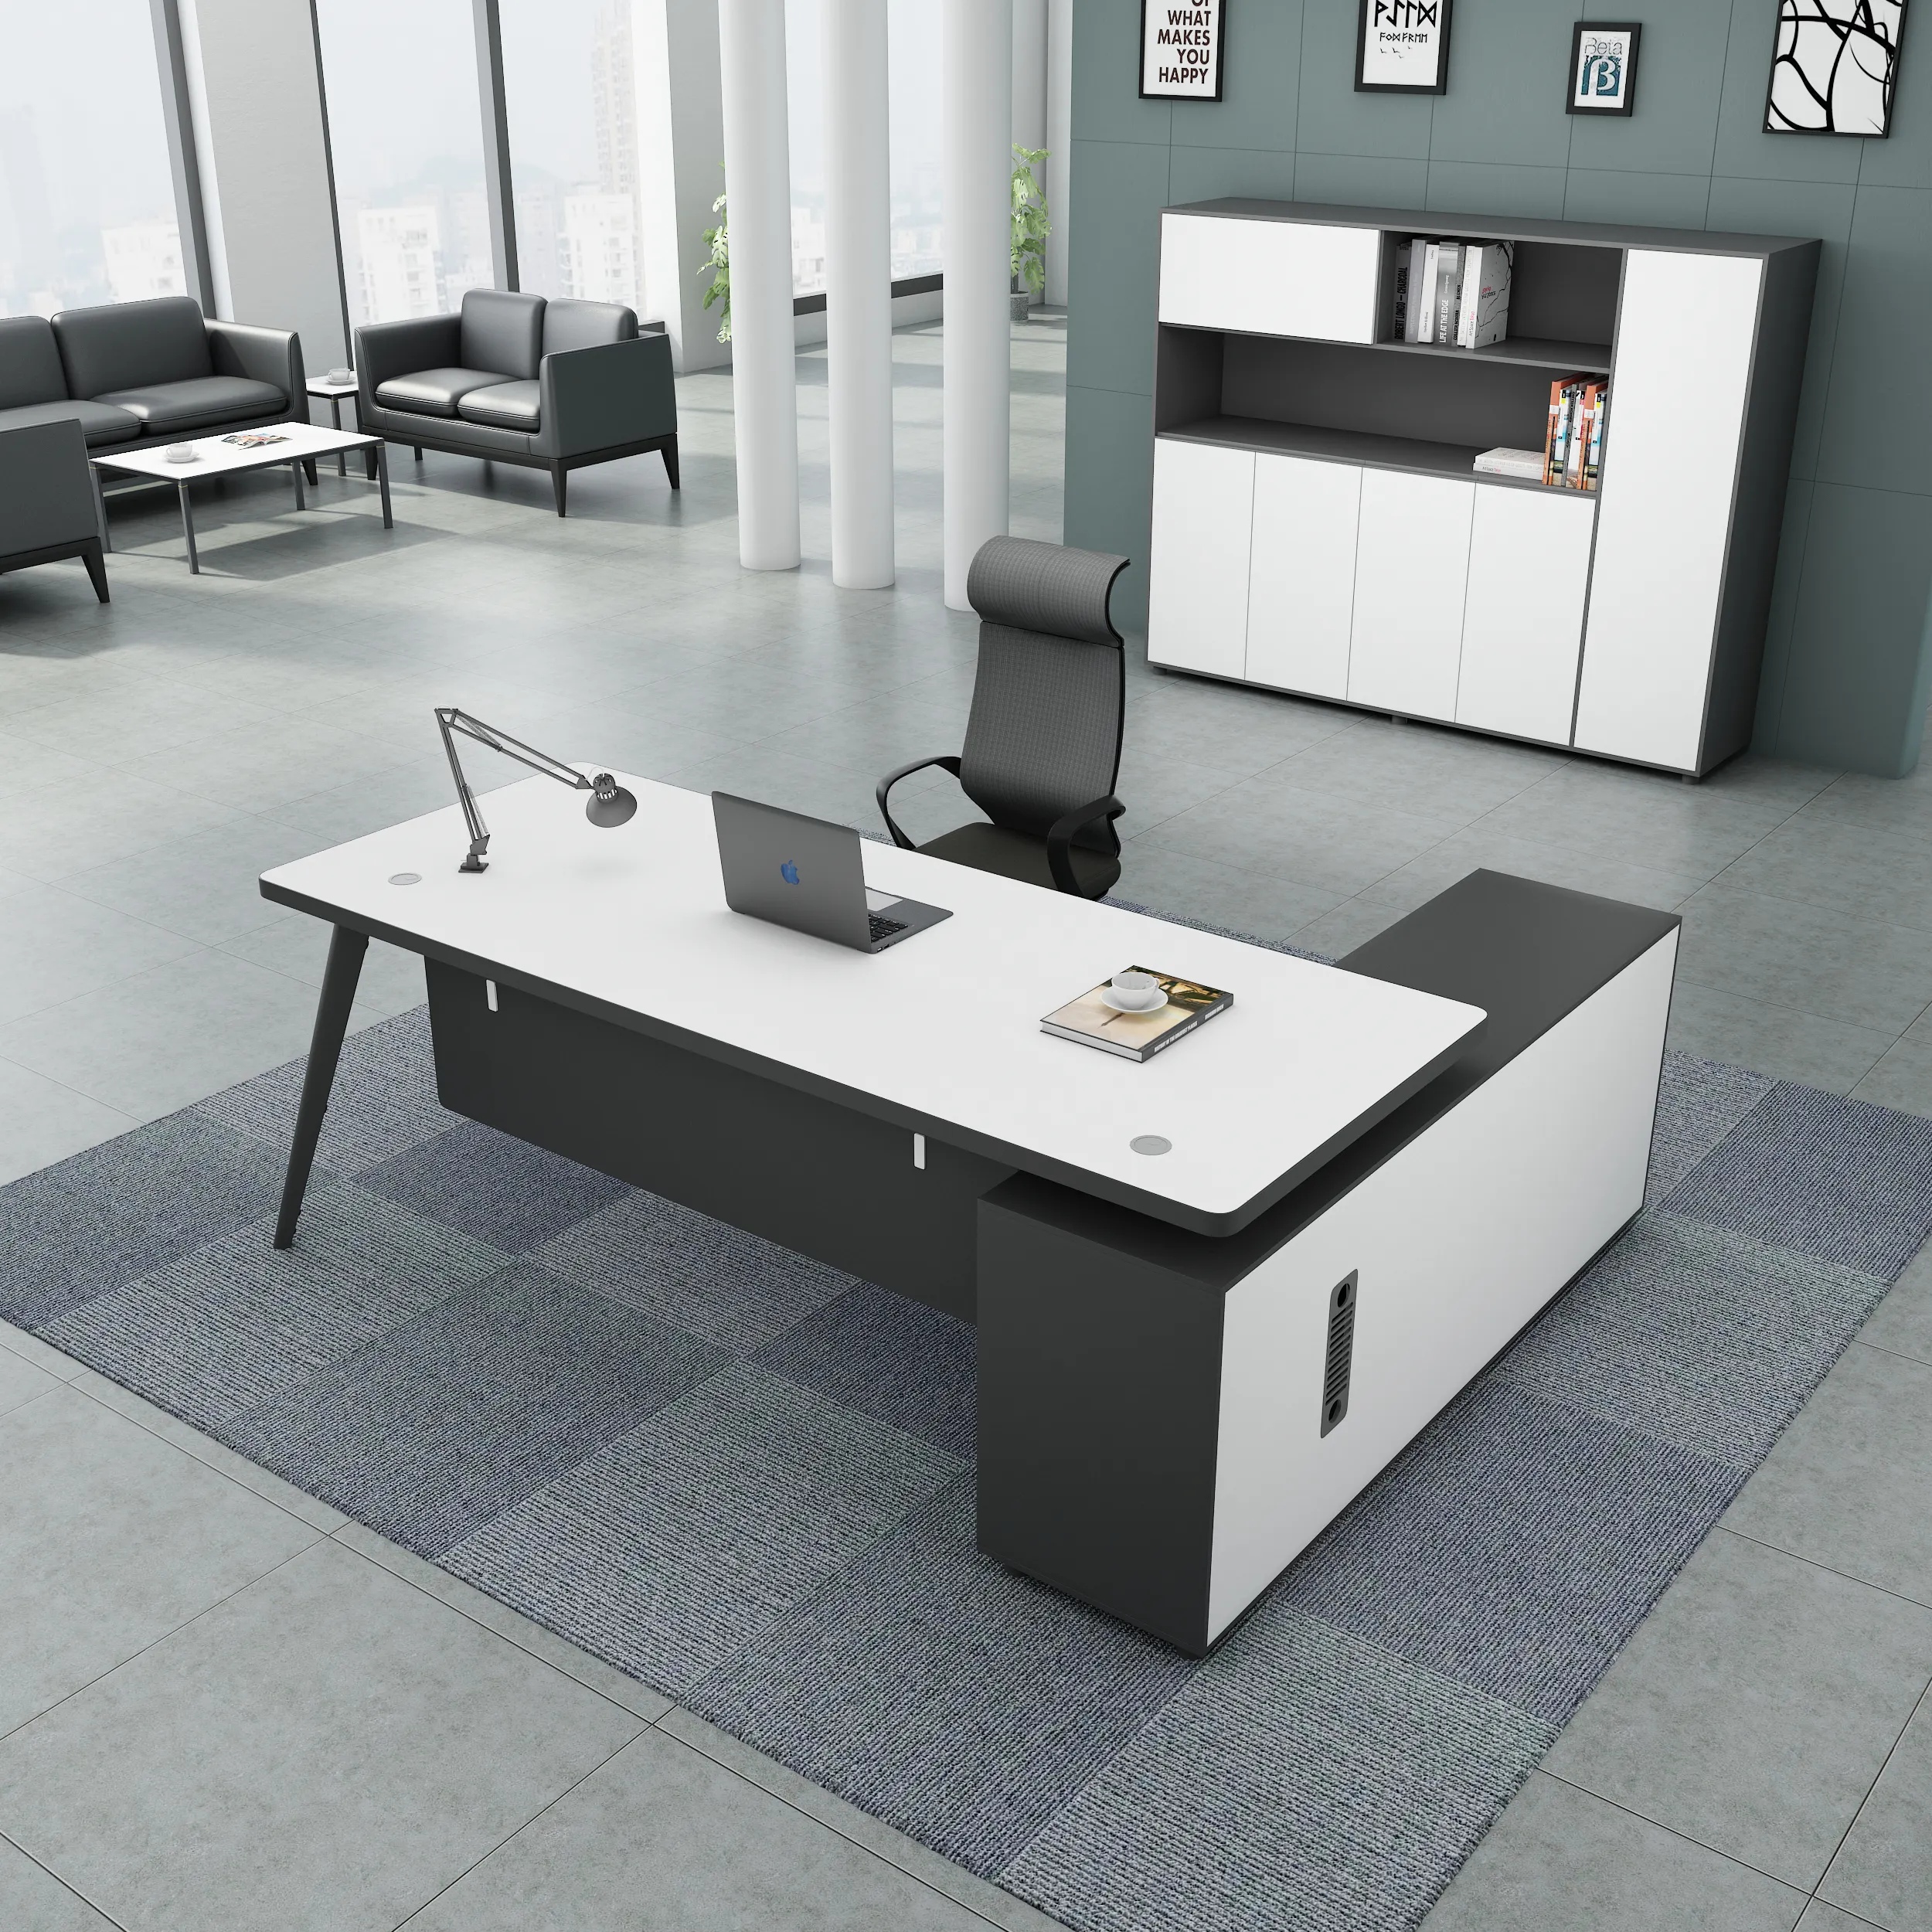 LBZ52 Modern table bureau office furniture L shaped mdf commercial furniture manager white executive office wooden desk